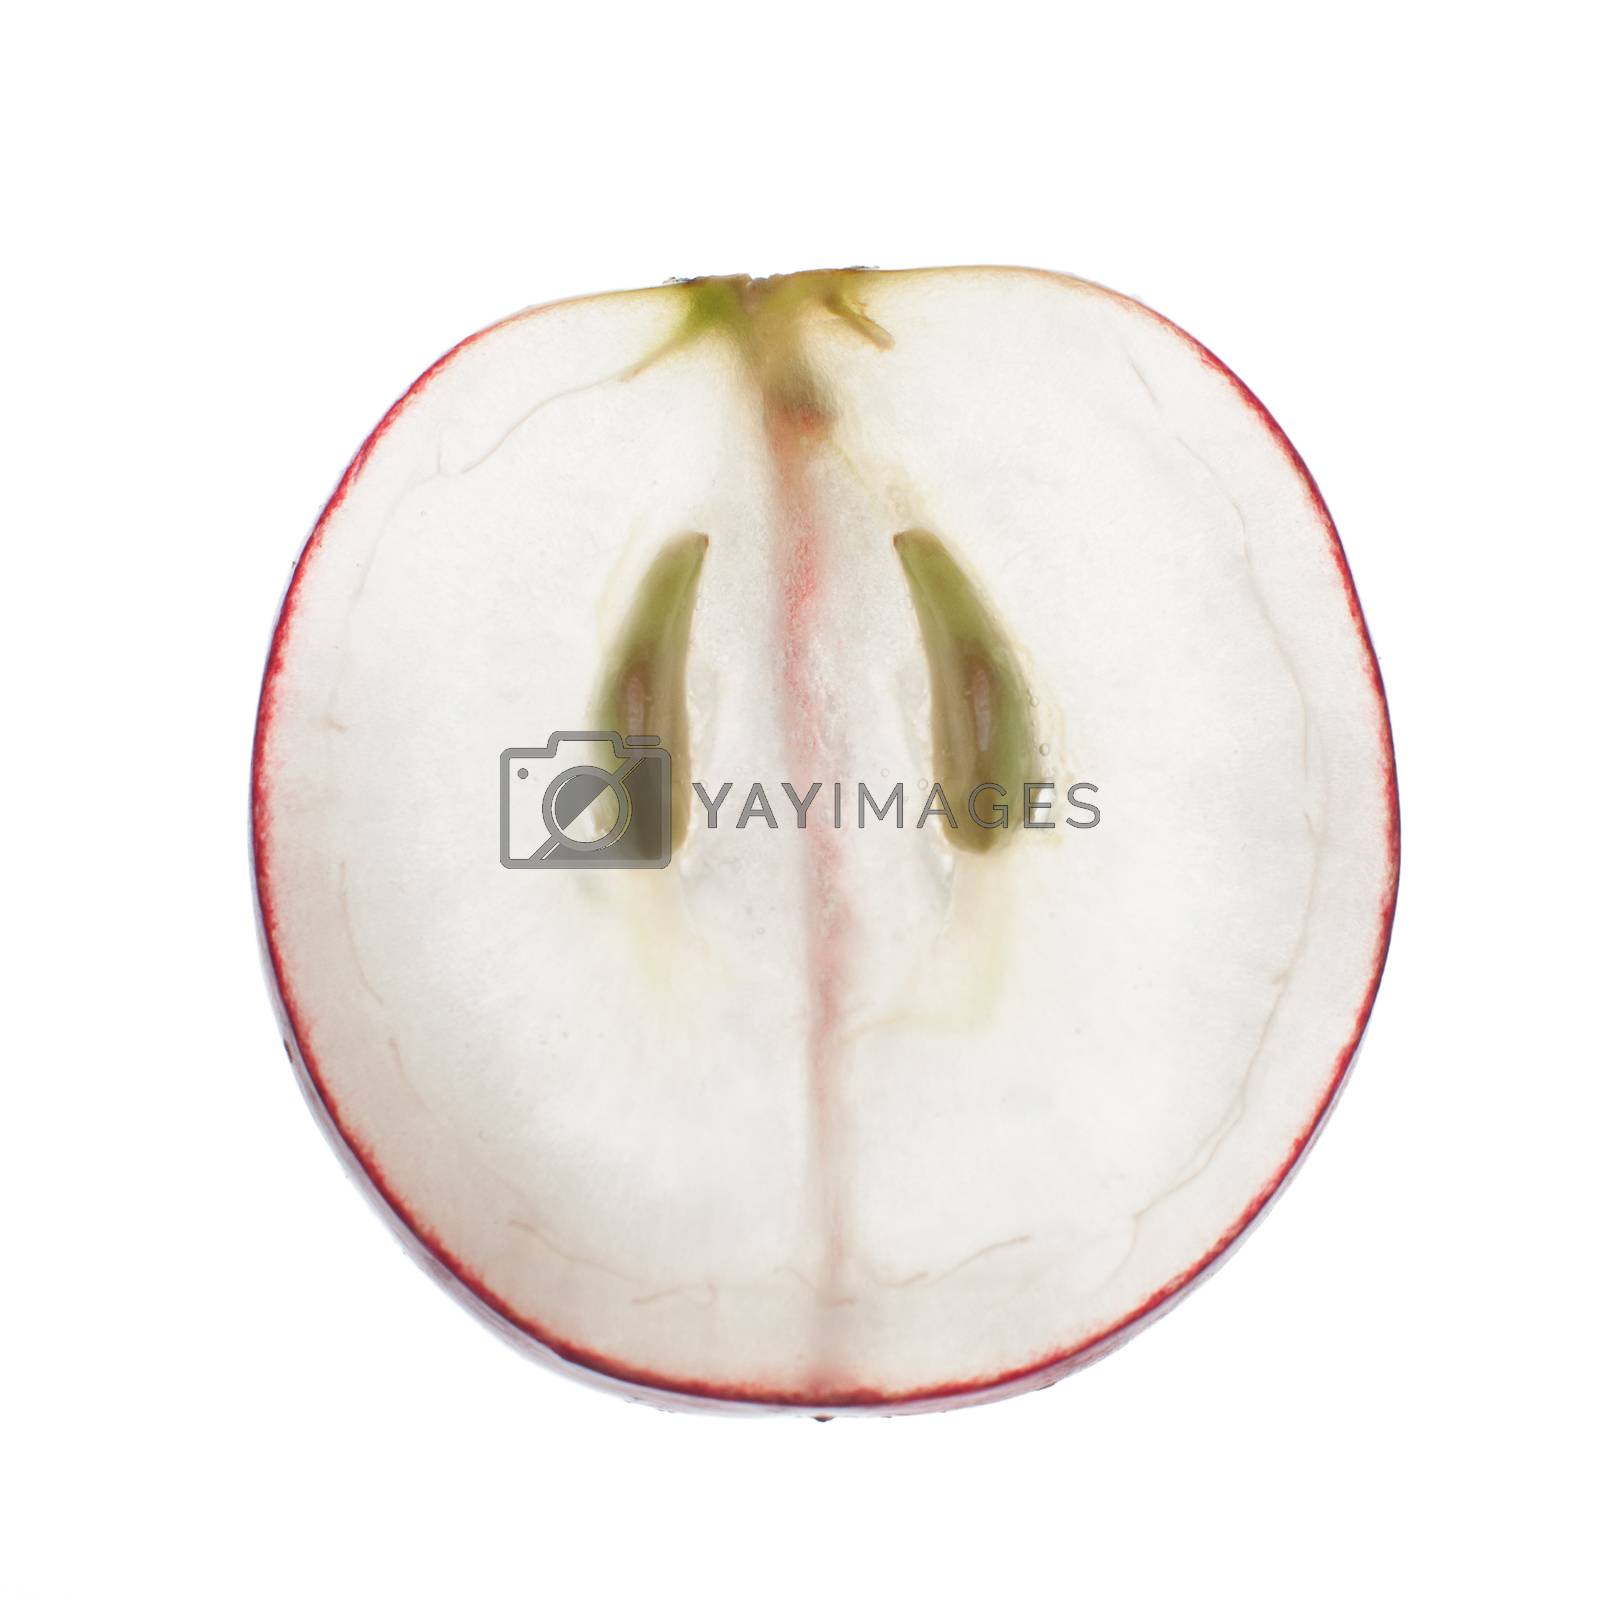 Royalty free image of Translucent slice of red grape by homydesign